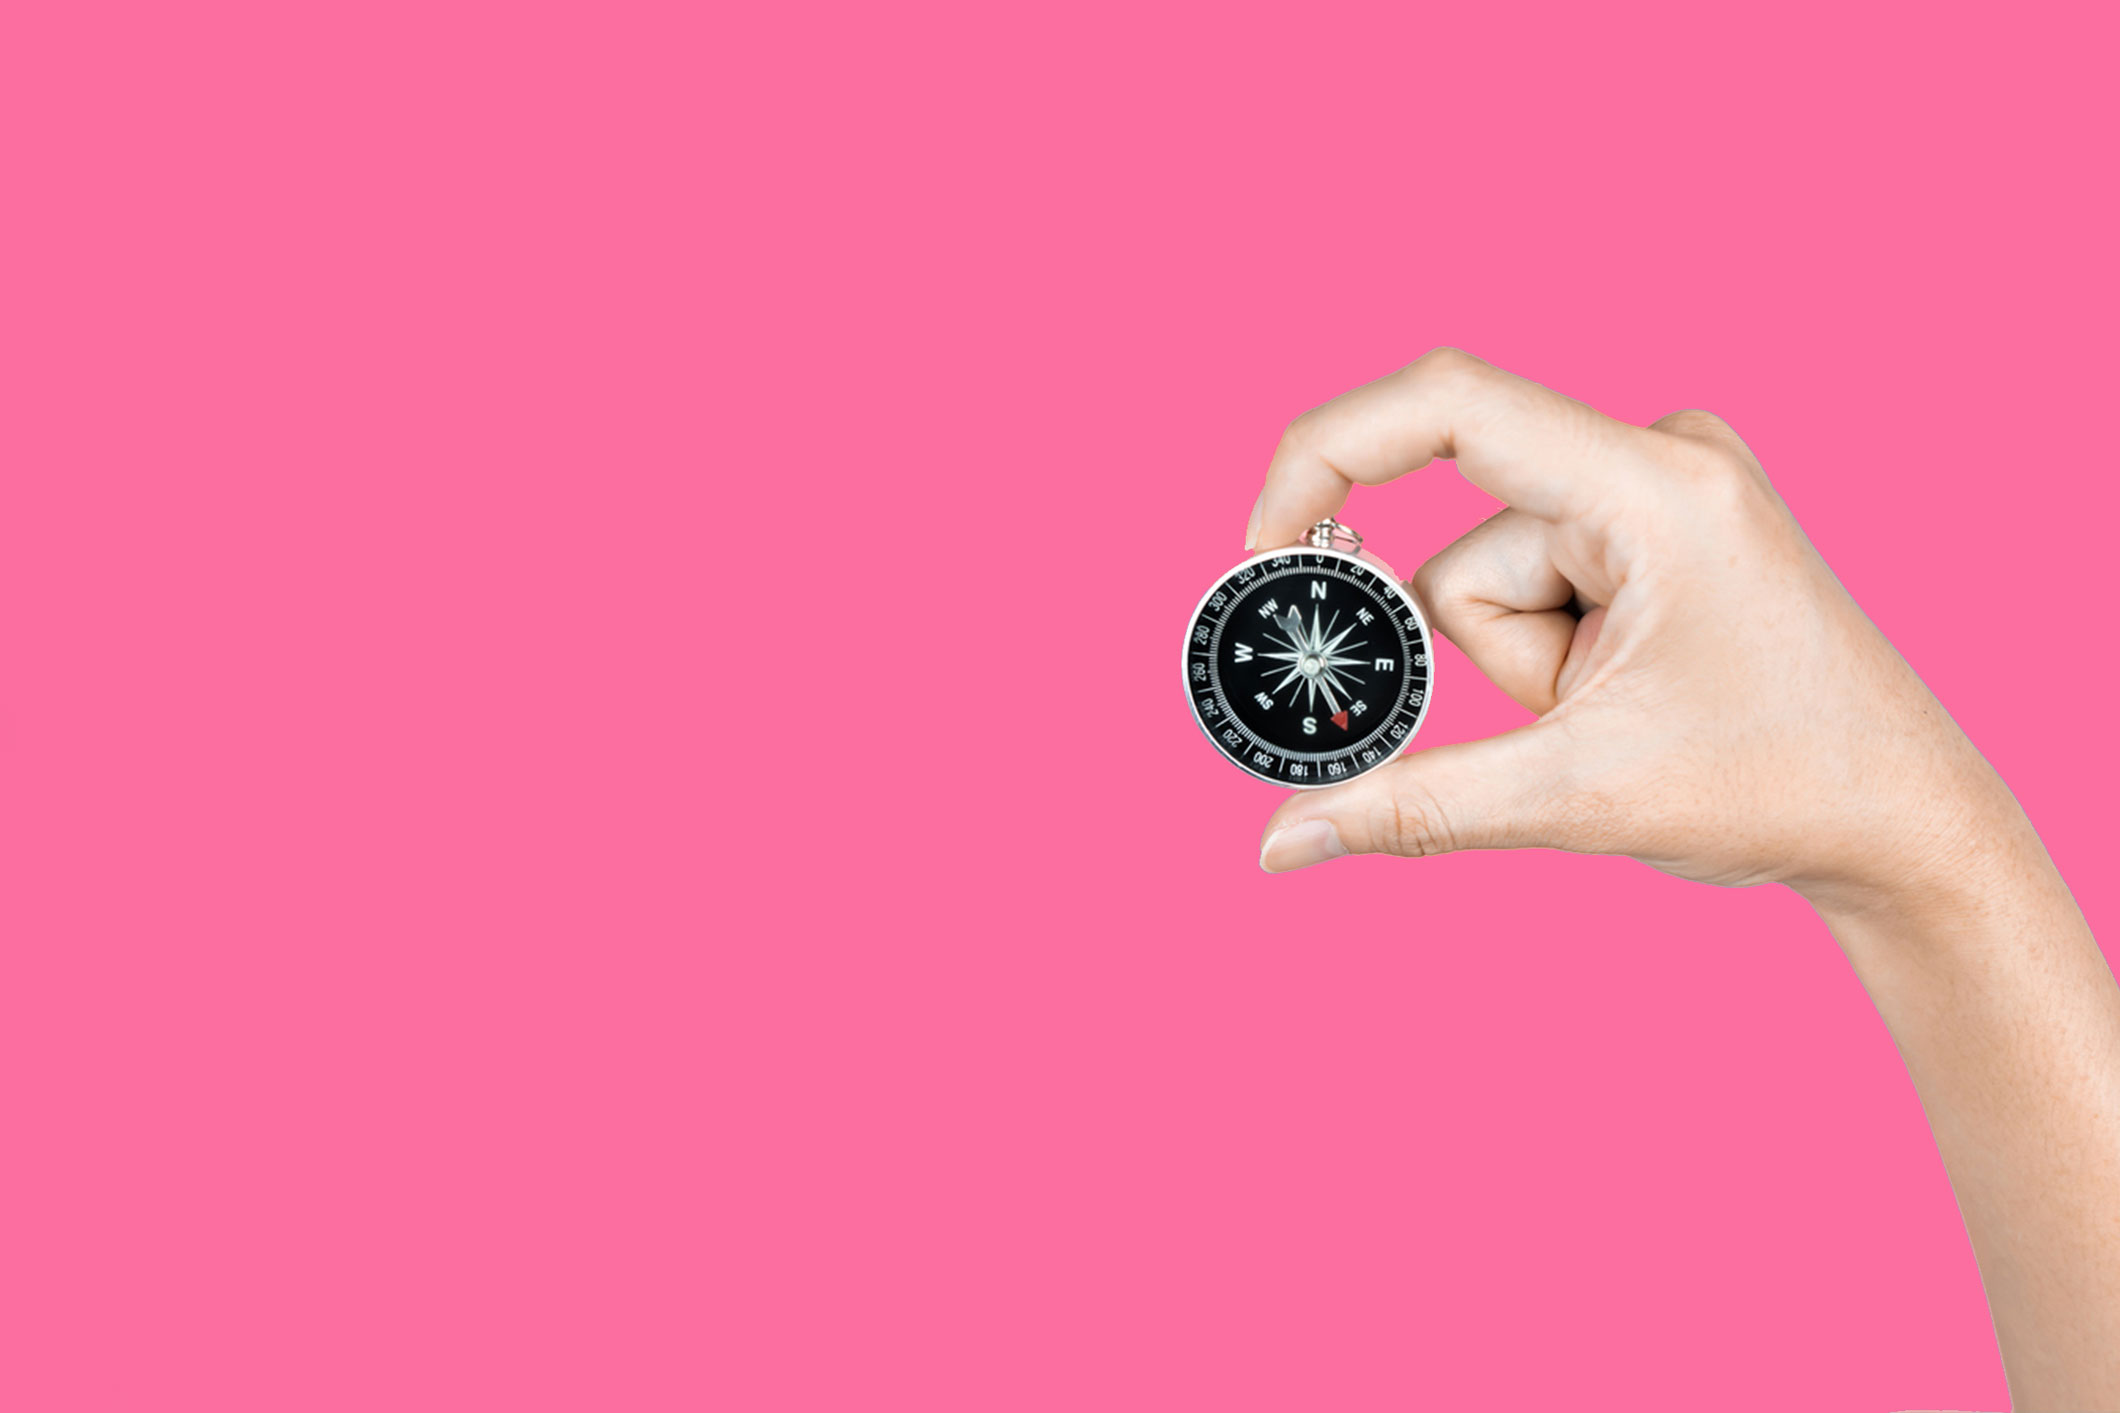 hand holding compass against bright pink background image for marketing blog